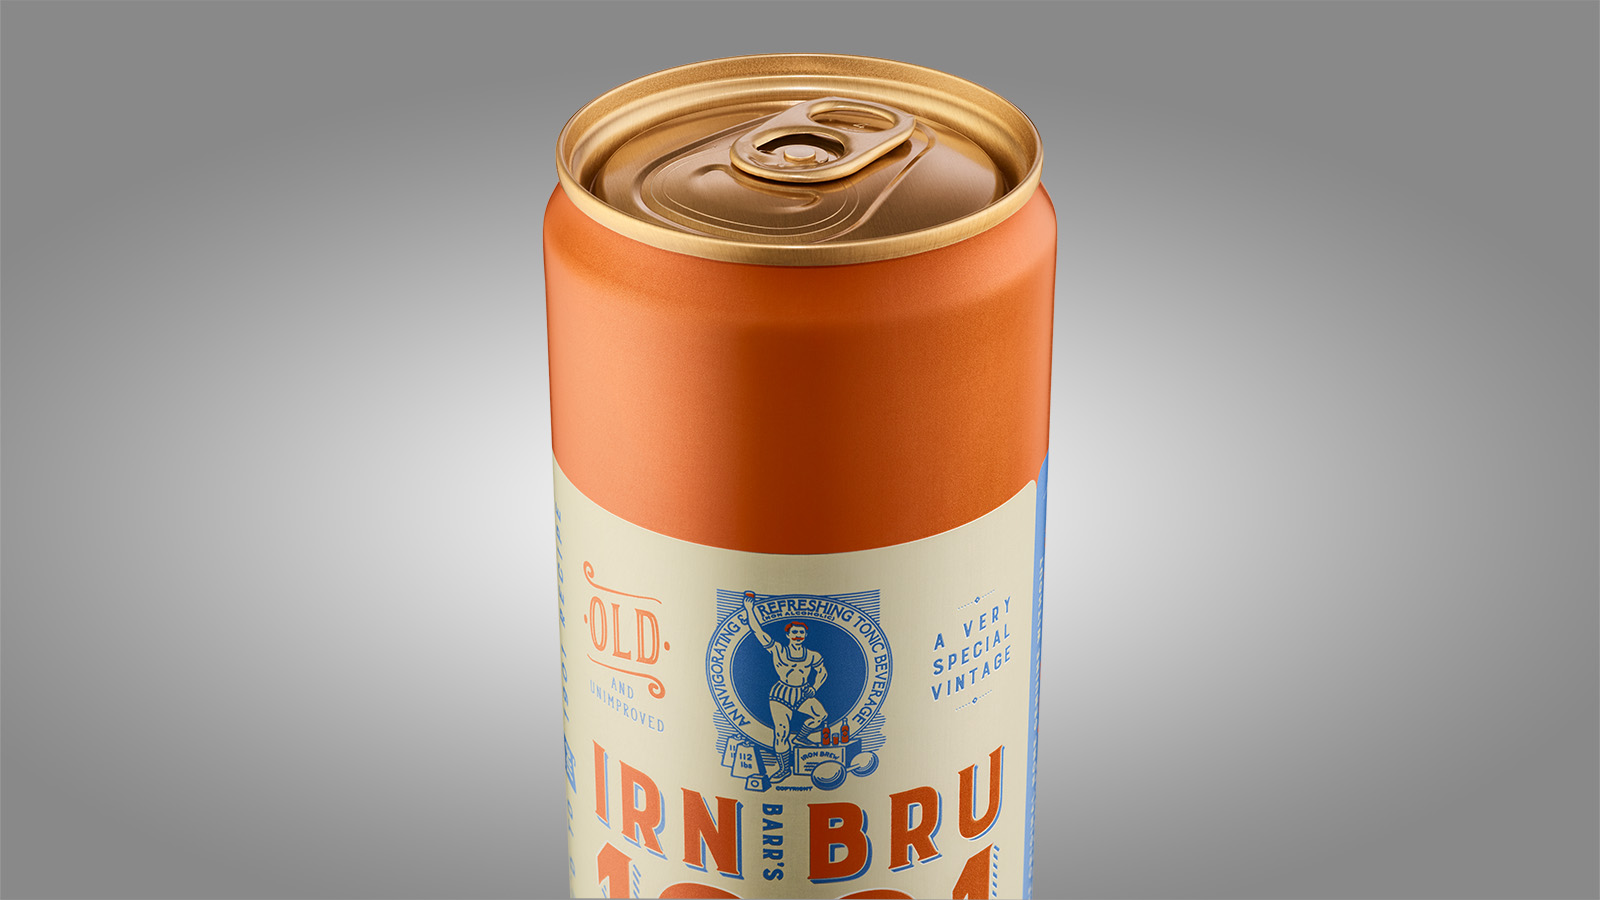 Helping Irn Bru go from strength to strength